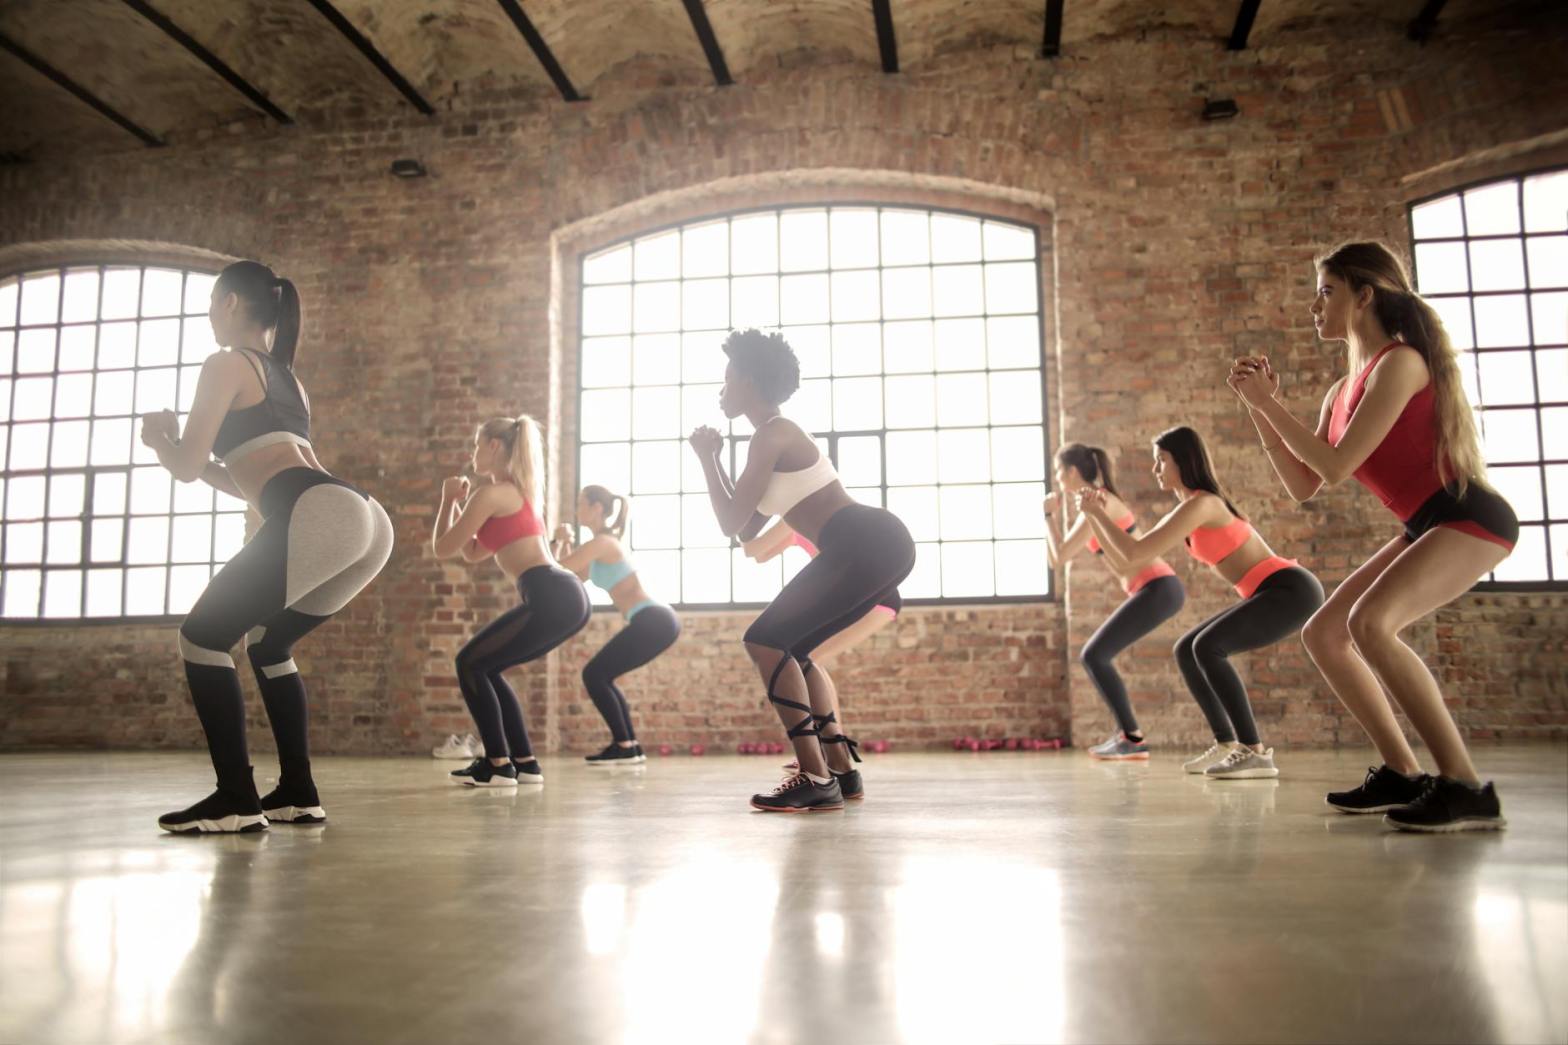 Group of women doing squats in an exercise class.